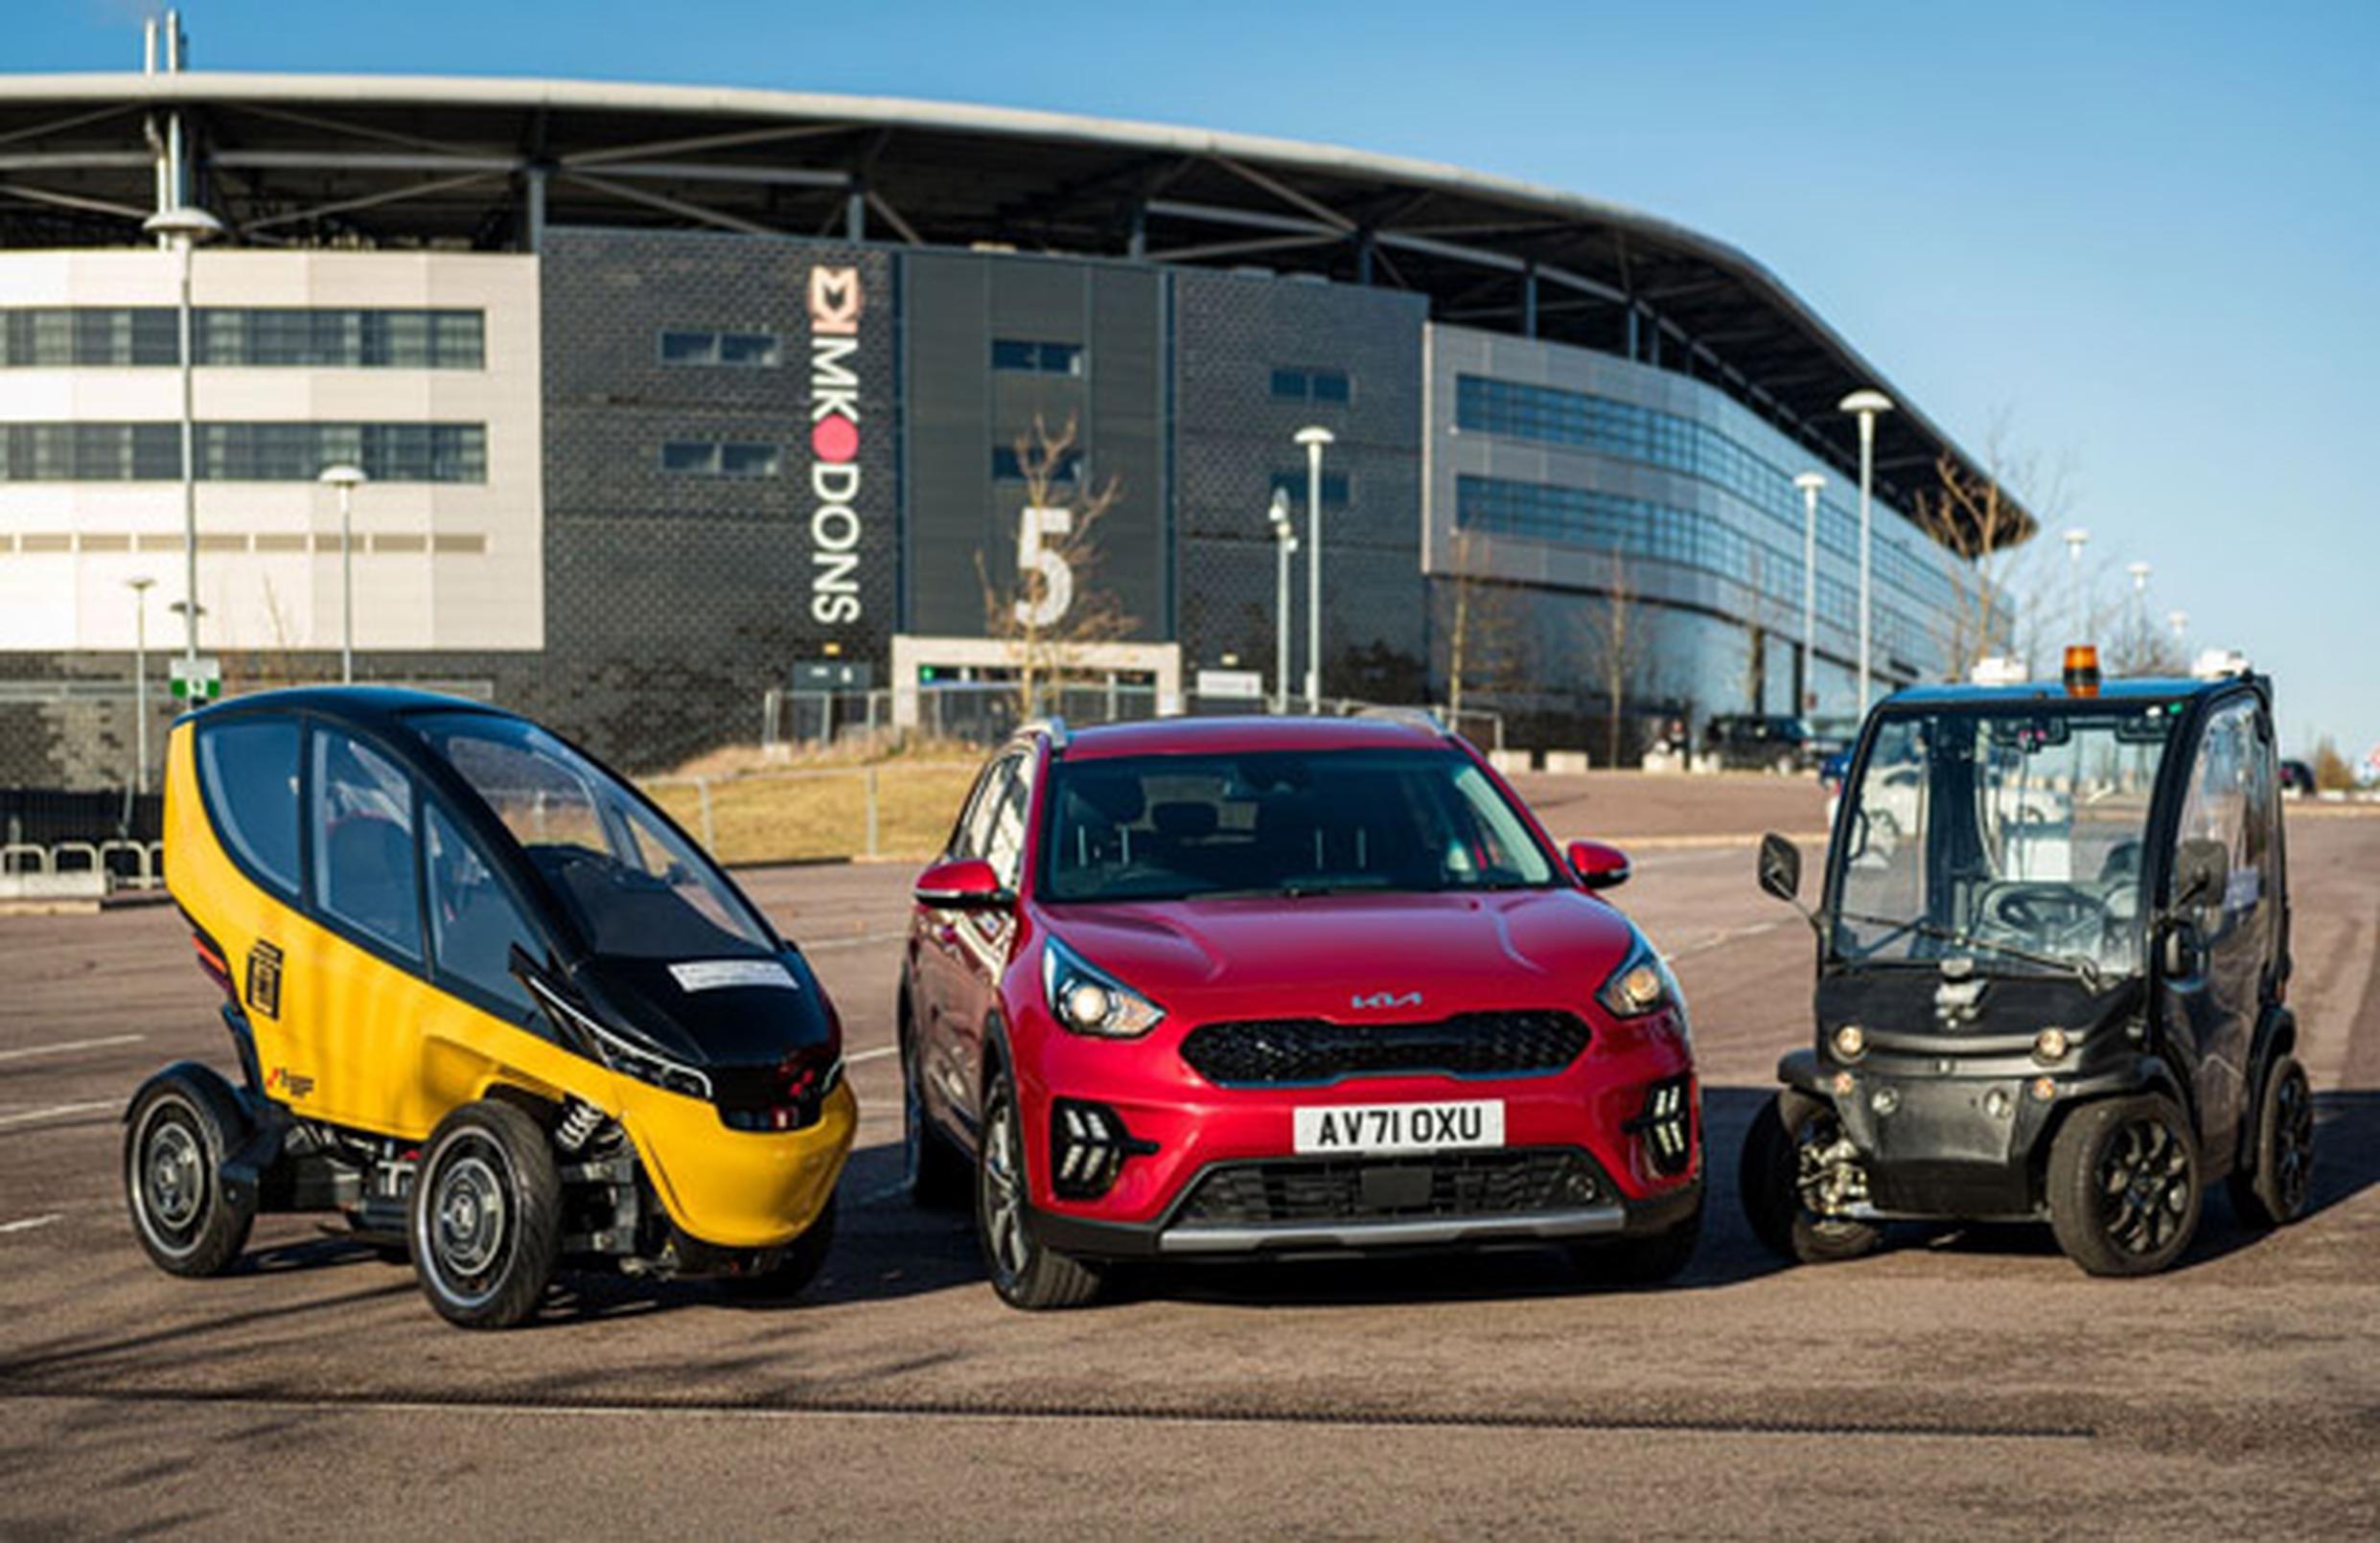 Fetch driverless vehicles to be trialled on streets of Milton Keynes